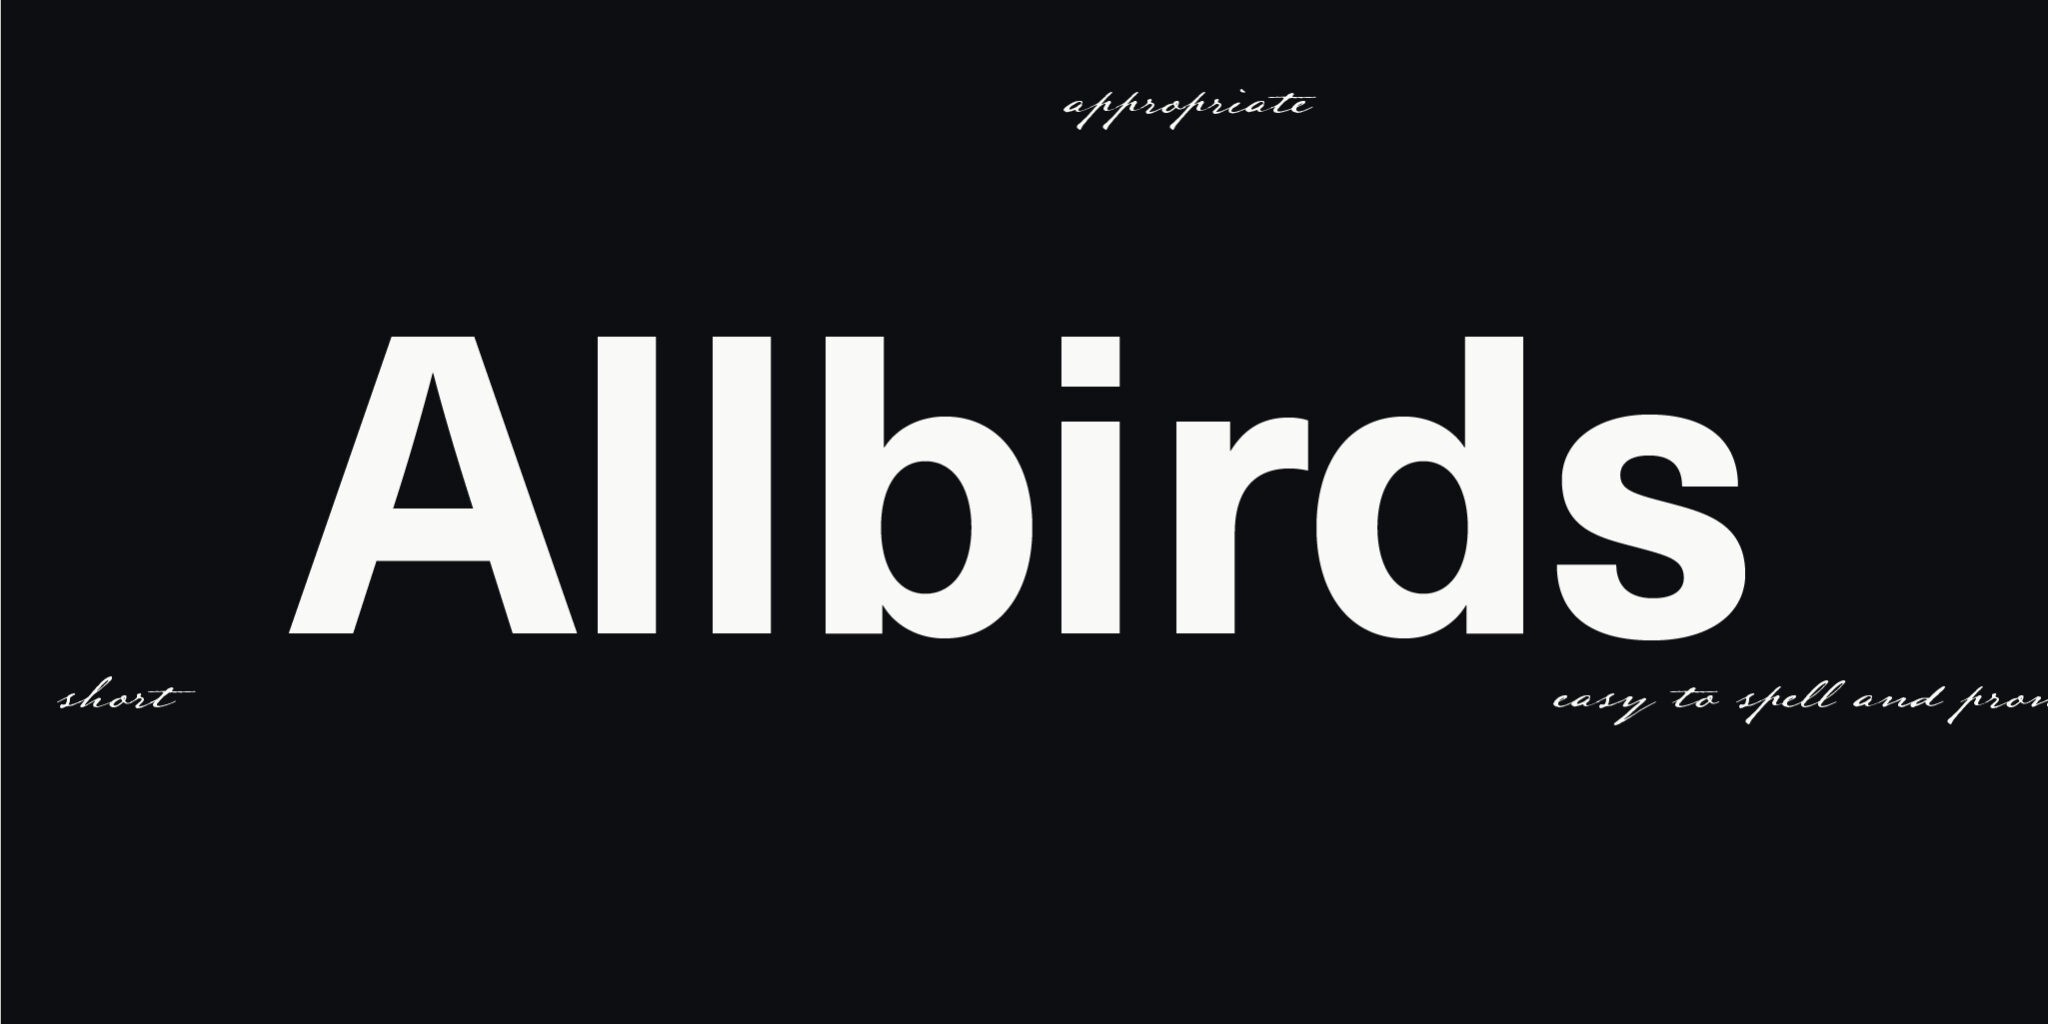 image showing the brand name 'Allbirds' and in small typography attributes that make a great name